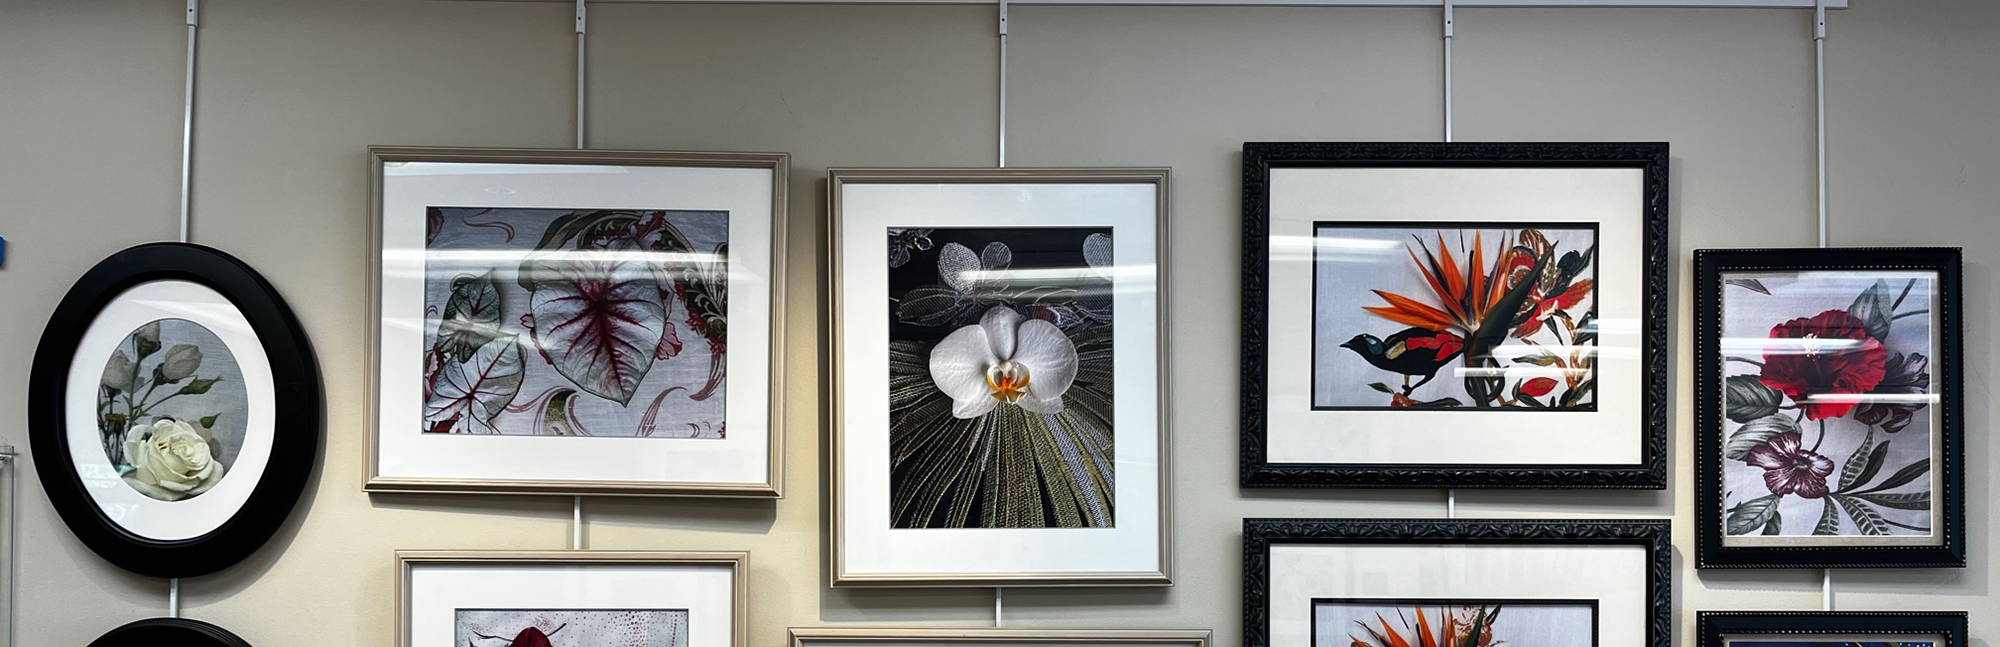 Featured in the Spotlight Gallery / "The Flower Show", Elaine Bean